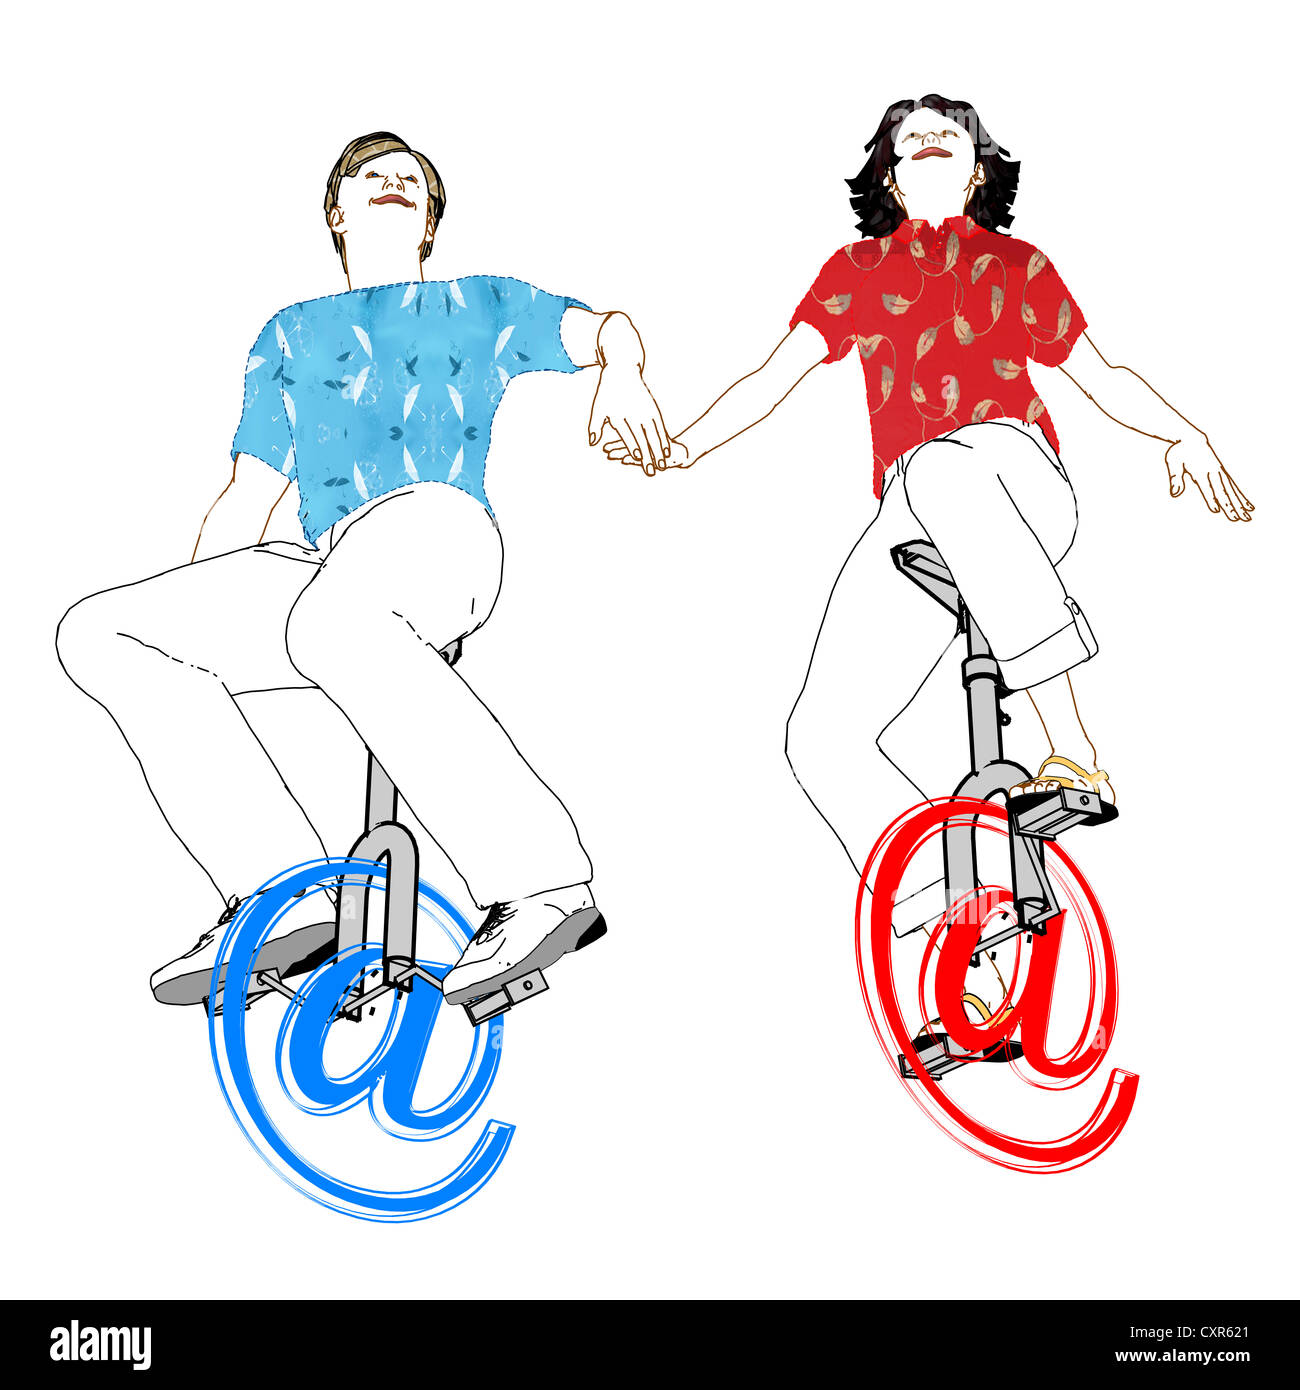 Man and woman riding on unicyles made of 'at' symbols, symbolic image for internet friendship, illustration Stock Photo